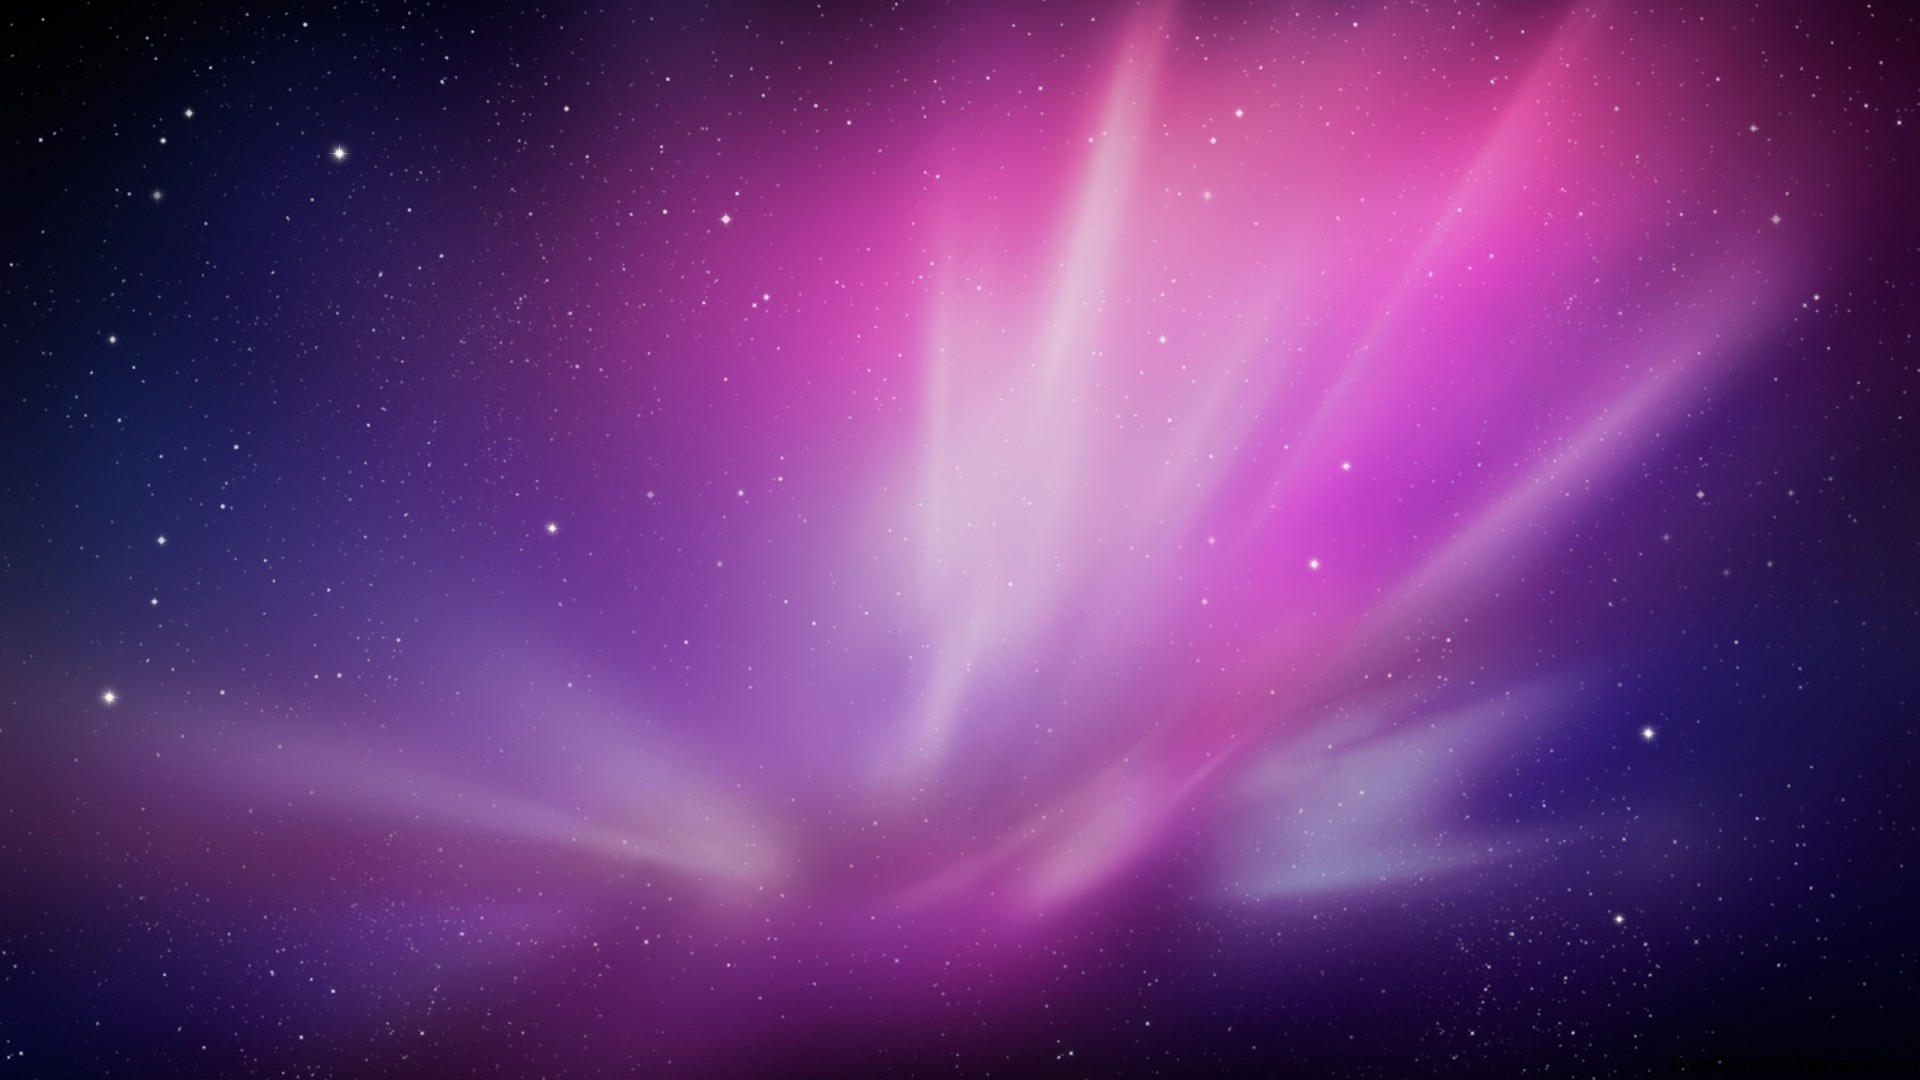 Enable hidden iMac wallpapers on any Mac or MacBook | RAWinfopages